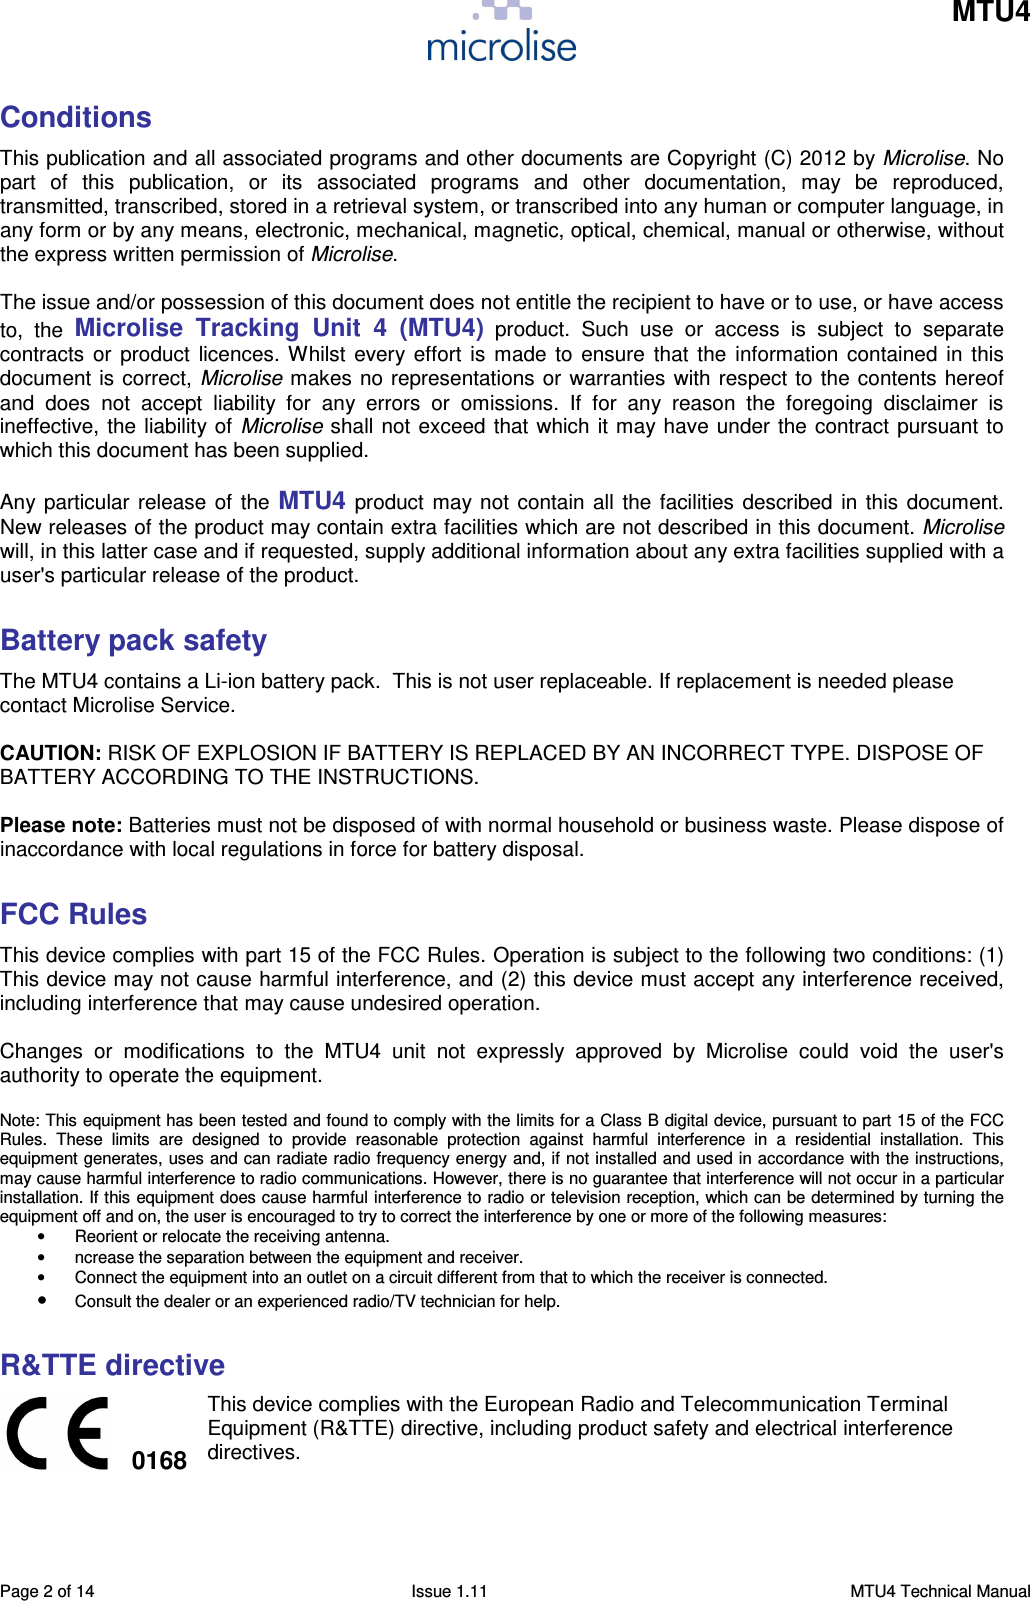    MTU4    Page 2 of 14  Issue 1.11  MTU4 Technical Manual Conditions This publication and all associated programs and other documents are Copyright (C) 2012 by Microlise. No part  of  this  publication,  or  its  associated  programs  and  other  documentation,  may  be  reproduced, transmitted, transcribed, stored in a retrieval system, or transcribed into any human or computer language, in any form or by any means, electronic, mechanical, magnetic, optical, chemical, manual or otherwise, without the express written permission of Microlise.  The issue and/or possession of this document does not entitle the recipient to have or to use, or have access to,  the Microlise  Tracking  Unit  4  (MTU4)  product.  Such  use  or  access  is  subject  to  separate contracts  or product  licences. Whilst every effort is  made to ensure that the  information contained  in this document is correct, Microlise makes no representations or warranties with respect to the contents hereof and  does  not  accept  liability  for  any  errors  or  omissions.  If  for  any  reason  the  foregoing  disclaimer  is ineffective, the liability of Microlise shall not exceed that which it may have under the contract pursuant to which this document has been supplied.  Any particular release of the MTU4 product may not contain all the facilities described in this document. New releases of the product may contain extra facilities which are not described in this document. Microlise will, in this latter case and if requested, supply additional information about any extra facilities supplied with a user&apos;s particular release of the product.  Battery pack safety The MTU4 contains a Li-ion battery pack.  This is not user replaceable. If replacement is needed please contact Microlise Service.  CAUTION: RISK OF EXPLOSION IF BATTERY IS REPLACED BY AN INCORRECT TYPE. DISPOSE OF BATTERY ACCORDING TO THE INSTRUCTIONS.  Please note: Batteries must not be disposed of with normal household or business waste. Please dispose of inaccordance with local regulations in force for battery disposal.  FCC Rules This device complies with part 15 of the FCC Rules. Operation is subject to the following two conditions: (1) This device may not cause harmful interference, and (2) this device must accept any interference received, including interference that may cause undesired operation.  Changes  or  modifications  to  the  MTU4  unit  not  expressly  approved  by  Microlise  could  void  the  user&apos;s authority to operate the equipment.  Note: This equipment has been tested and found to comply with the limits for a Class B digital device, pursuant to part 15 of the FCC Rules.  These  limits  are  designed  to  provide  reasonable  protection  against  harmful  interference  in  a  residential  installation.  This equipment generates, uses and can radiate radio frequency energy and, if not installed and used in accordance with the instructions, may cause harmful interference to radio communications. However, there is no guarantee that interference will not occur in a particular installation. If this equipment does cause harmful interference to radio or television reception, which can be determined by turning the equipment off and on, the user is encouraged to try to correct the interference by one or more of the following measures: •  Reorient or relocate the receiving antenna. •  ncrease the separation between the equipment and receiver. •  Connect the equipment into an outlet on a circuit different from that to which the receiver is connected. • Consult the dealer or an experienced radio/TV technician for help.  R&amp;TTE directive  0168 This device complies with the European Radio and Telecommunication Terminal Equipment (R&amp;TTE) directive, including product safety and electrical interference directives. 